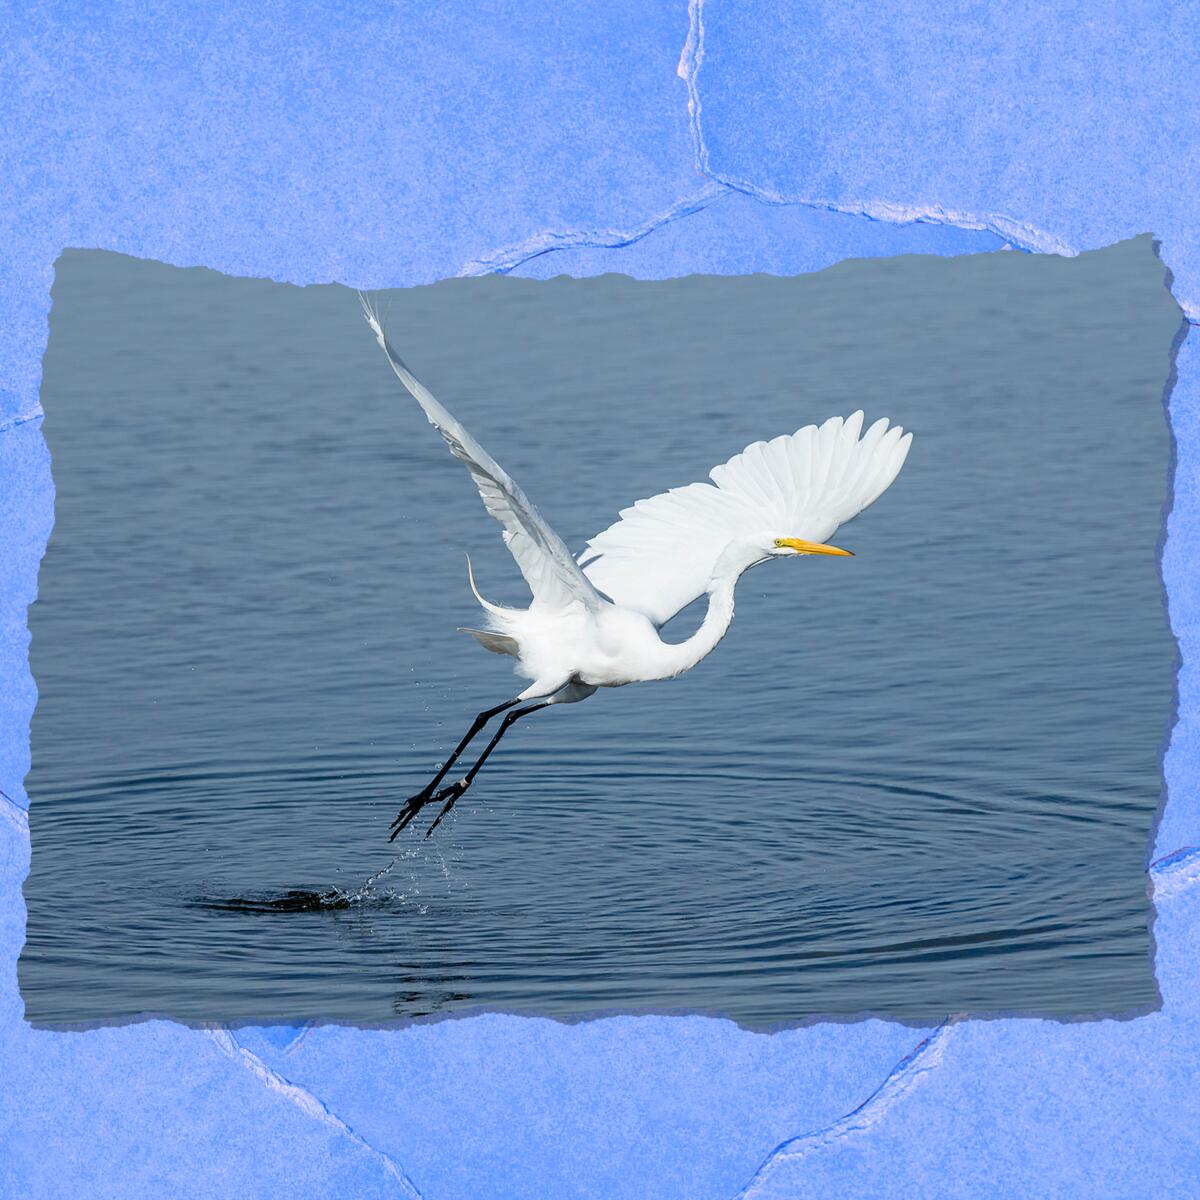 A white bird with long, slender neck stretches its wings as it flies low over water.